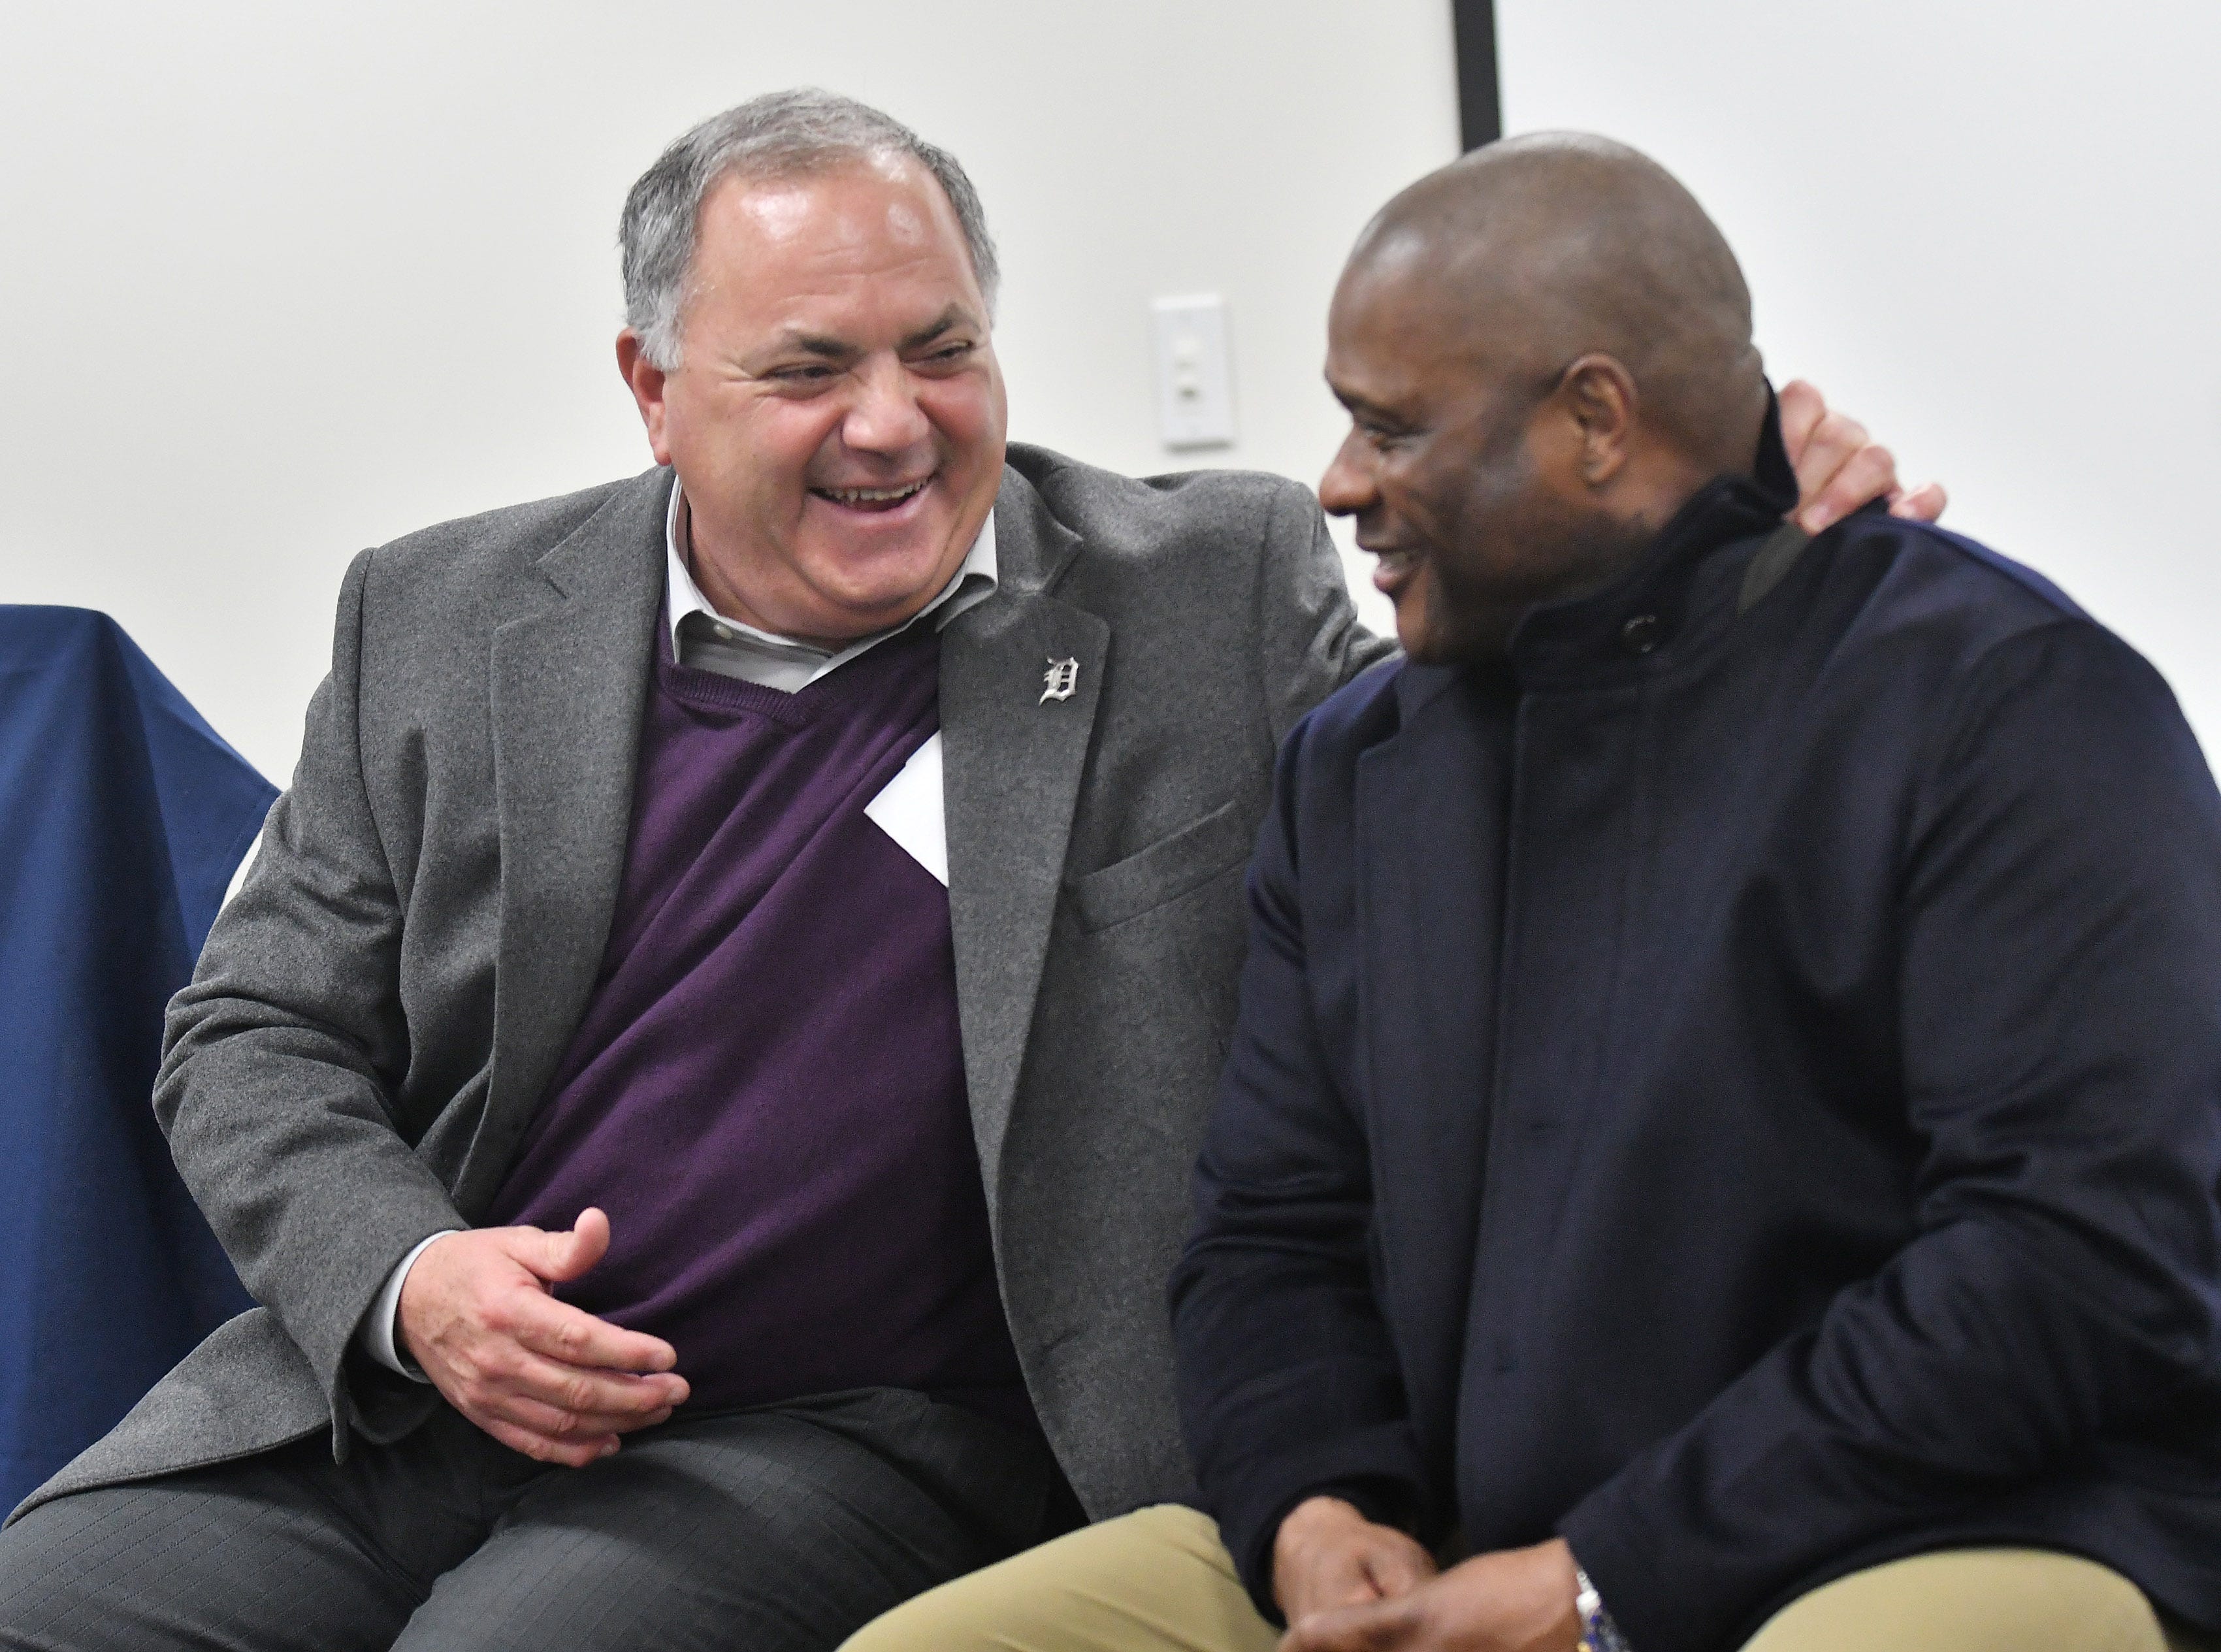 Al Avila, the Tigers executive vice president of baseball operations and general manager, talks with hitting coach Lloyd McClendon during a stop Thursday on the team's winter caravan at the John D. Dingell VA Medical Center in Detroit.